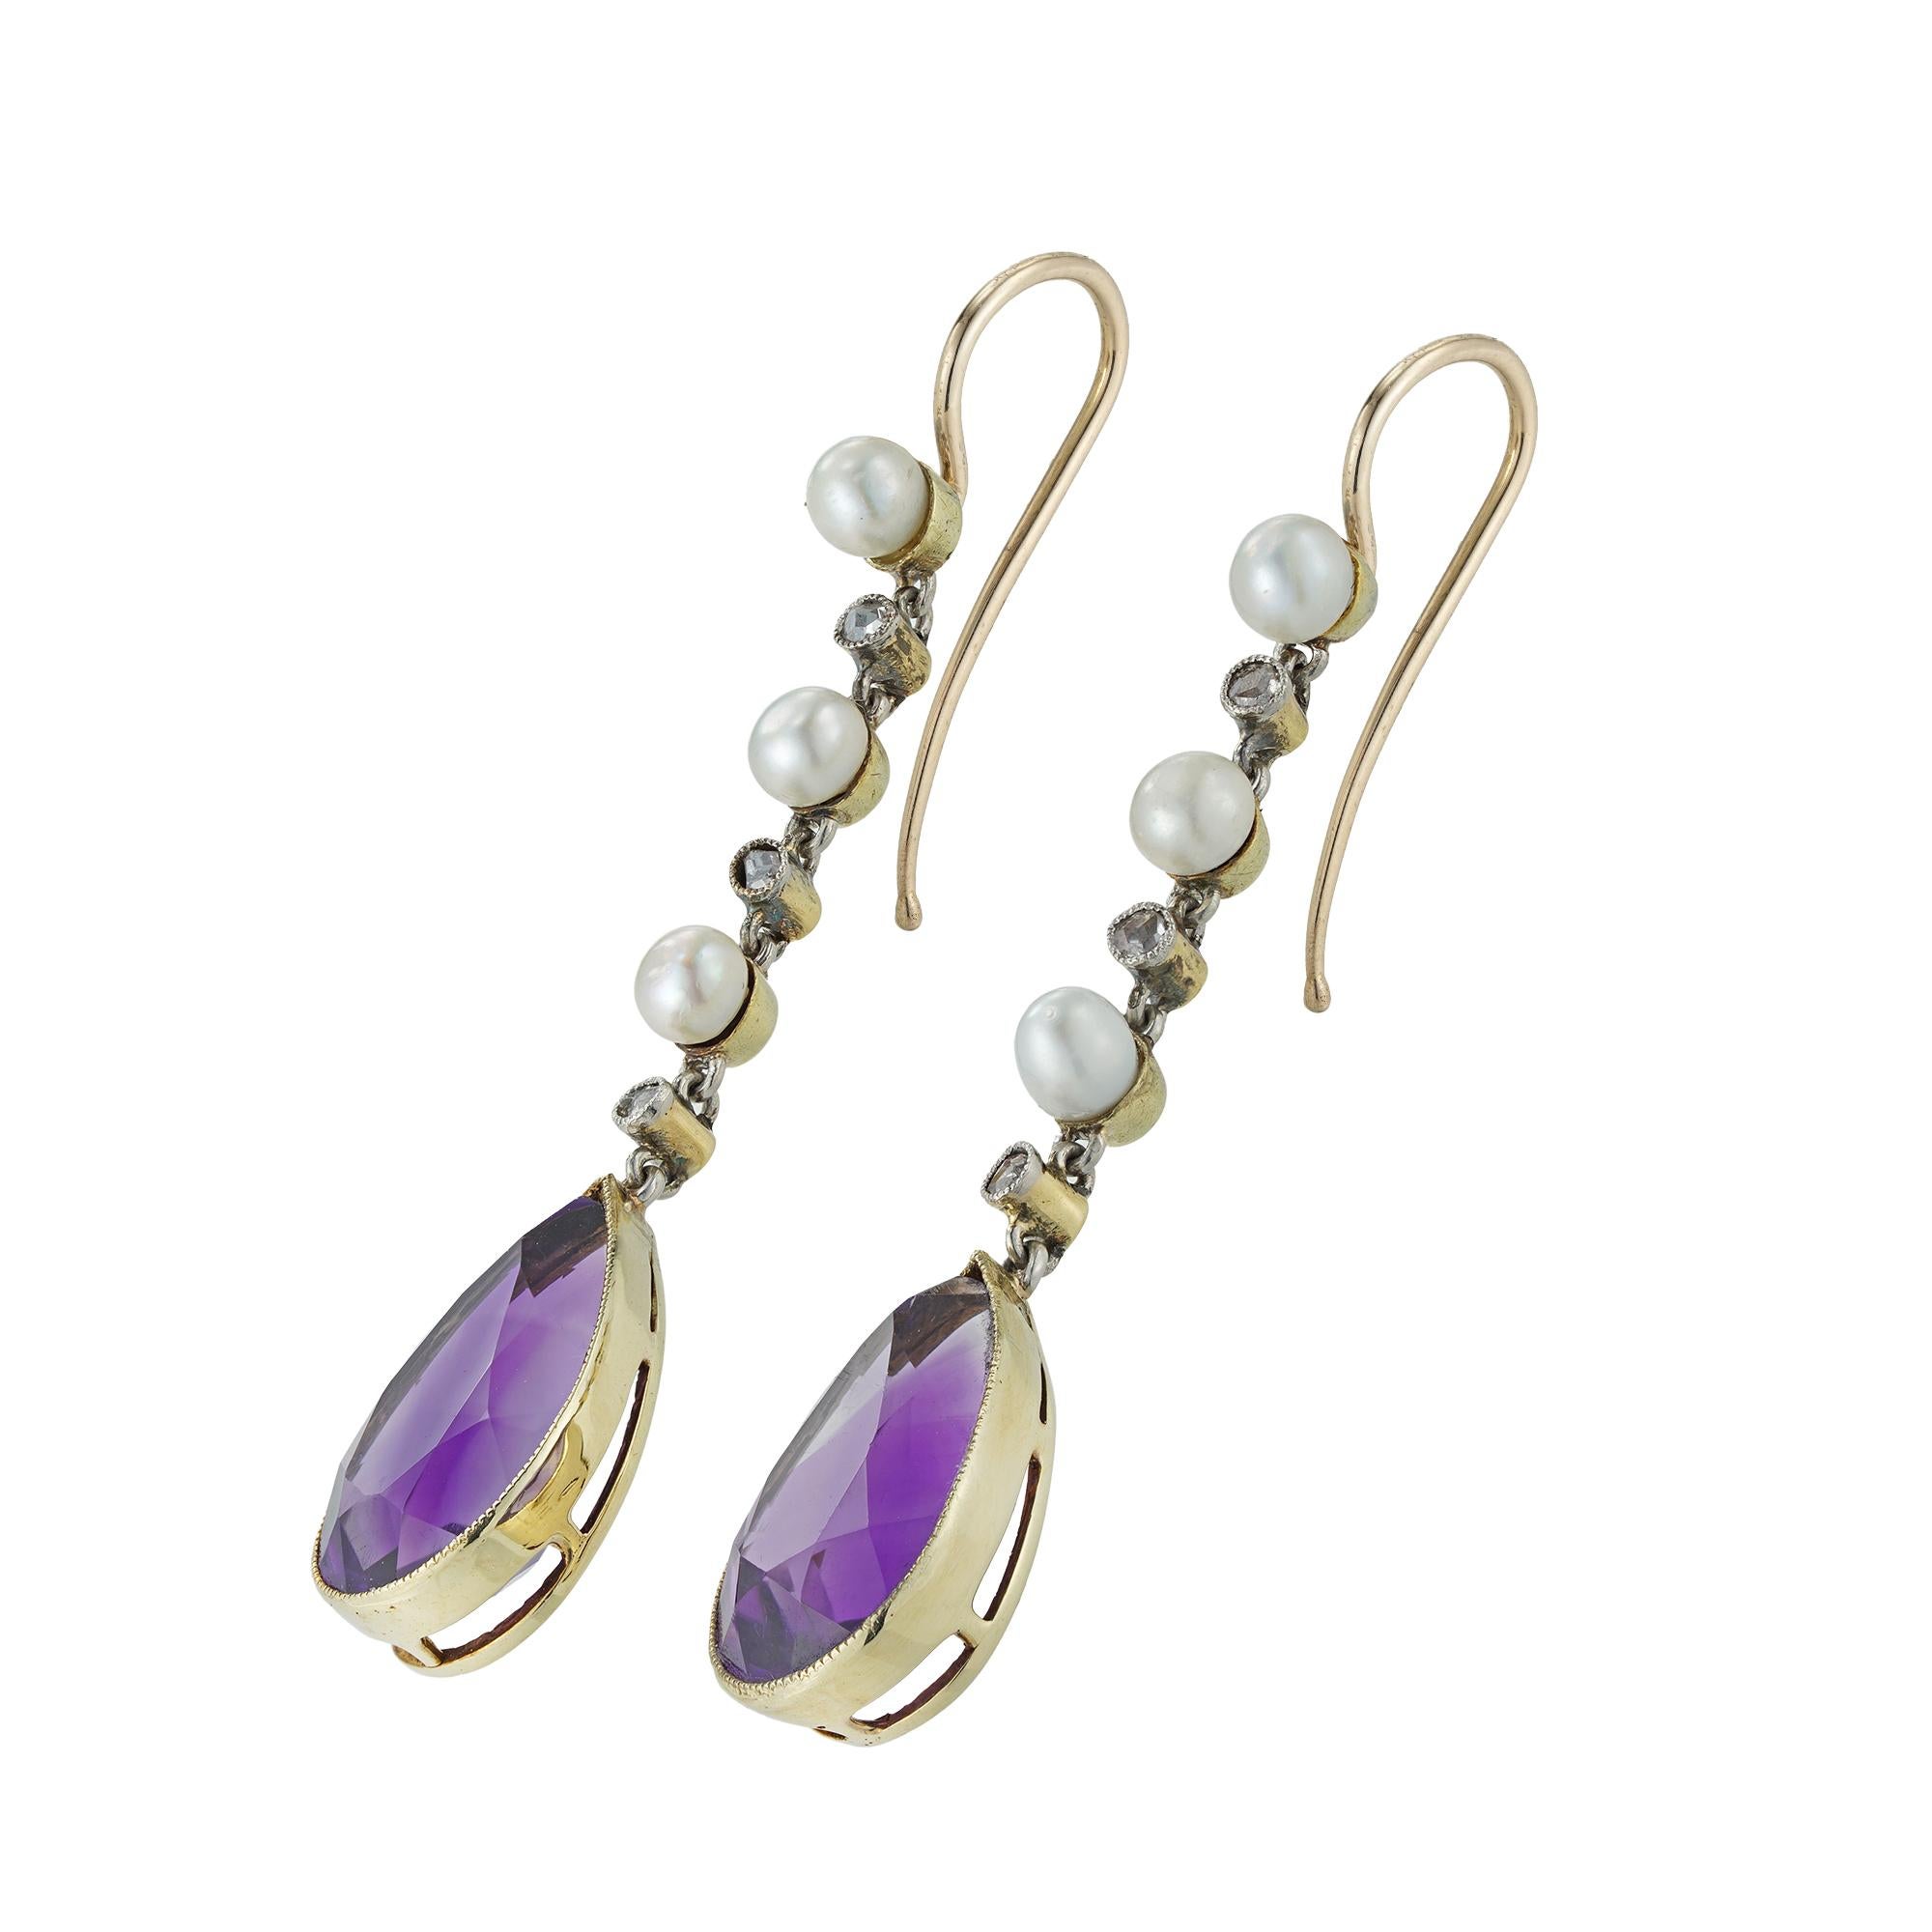 A pair of Edwardian amethyst, pearl and diamond drop earrings, each earring with a pear-shaped amethyst estimated to weigh 8 carats for the pair, suspended by a run set with three small natural pearls alternating with three rose-cut diamonds, all